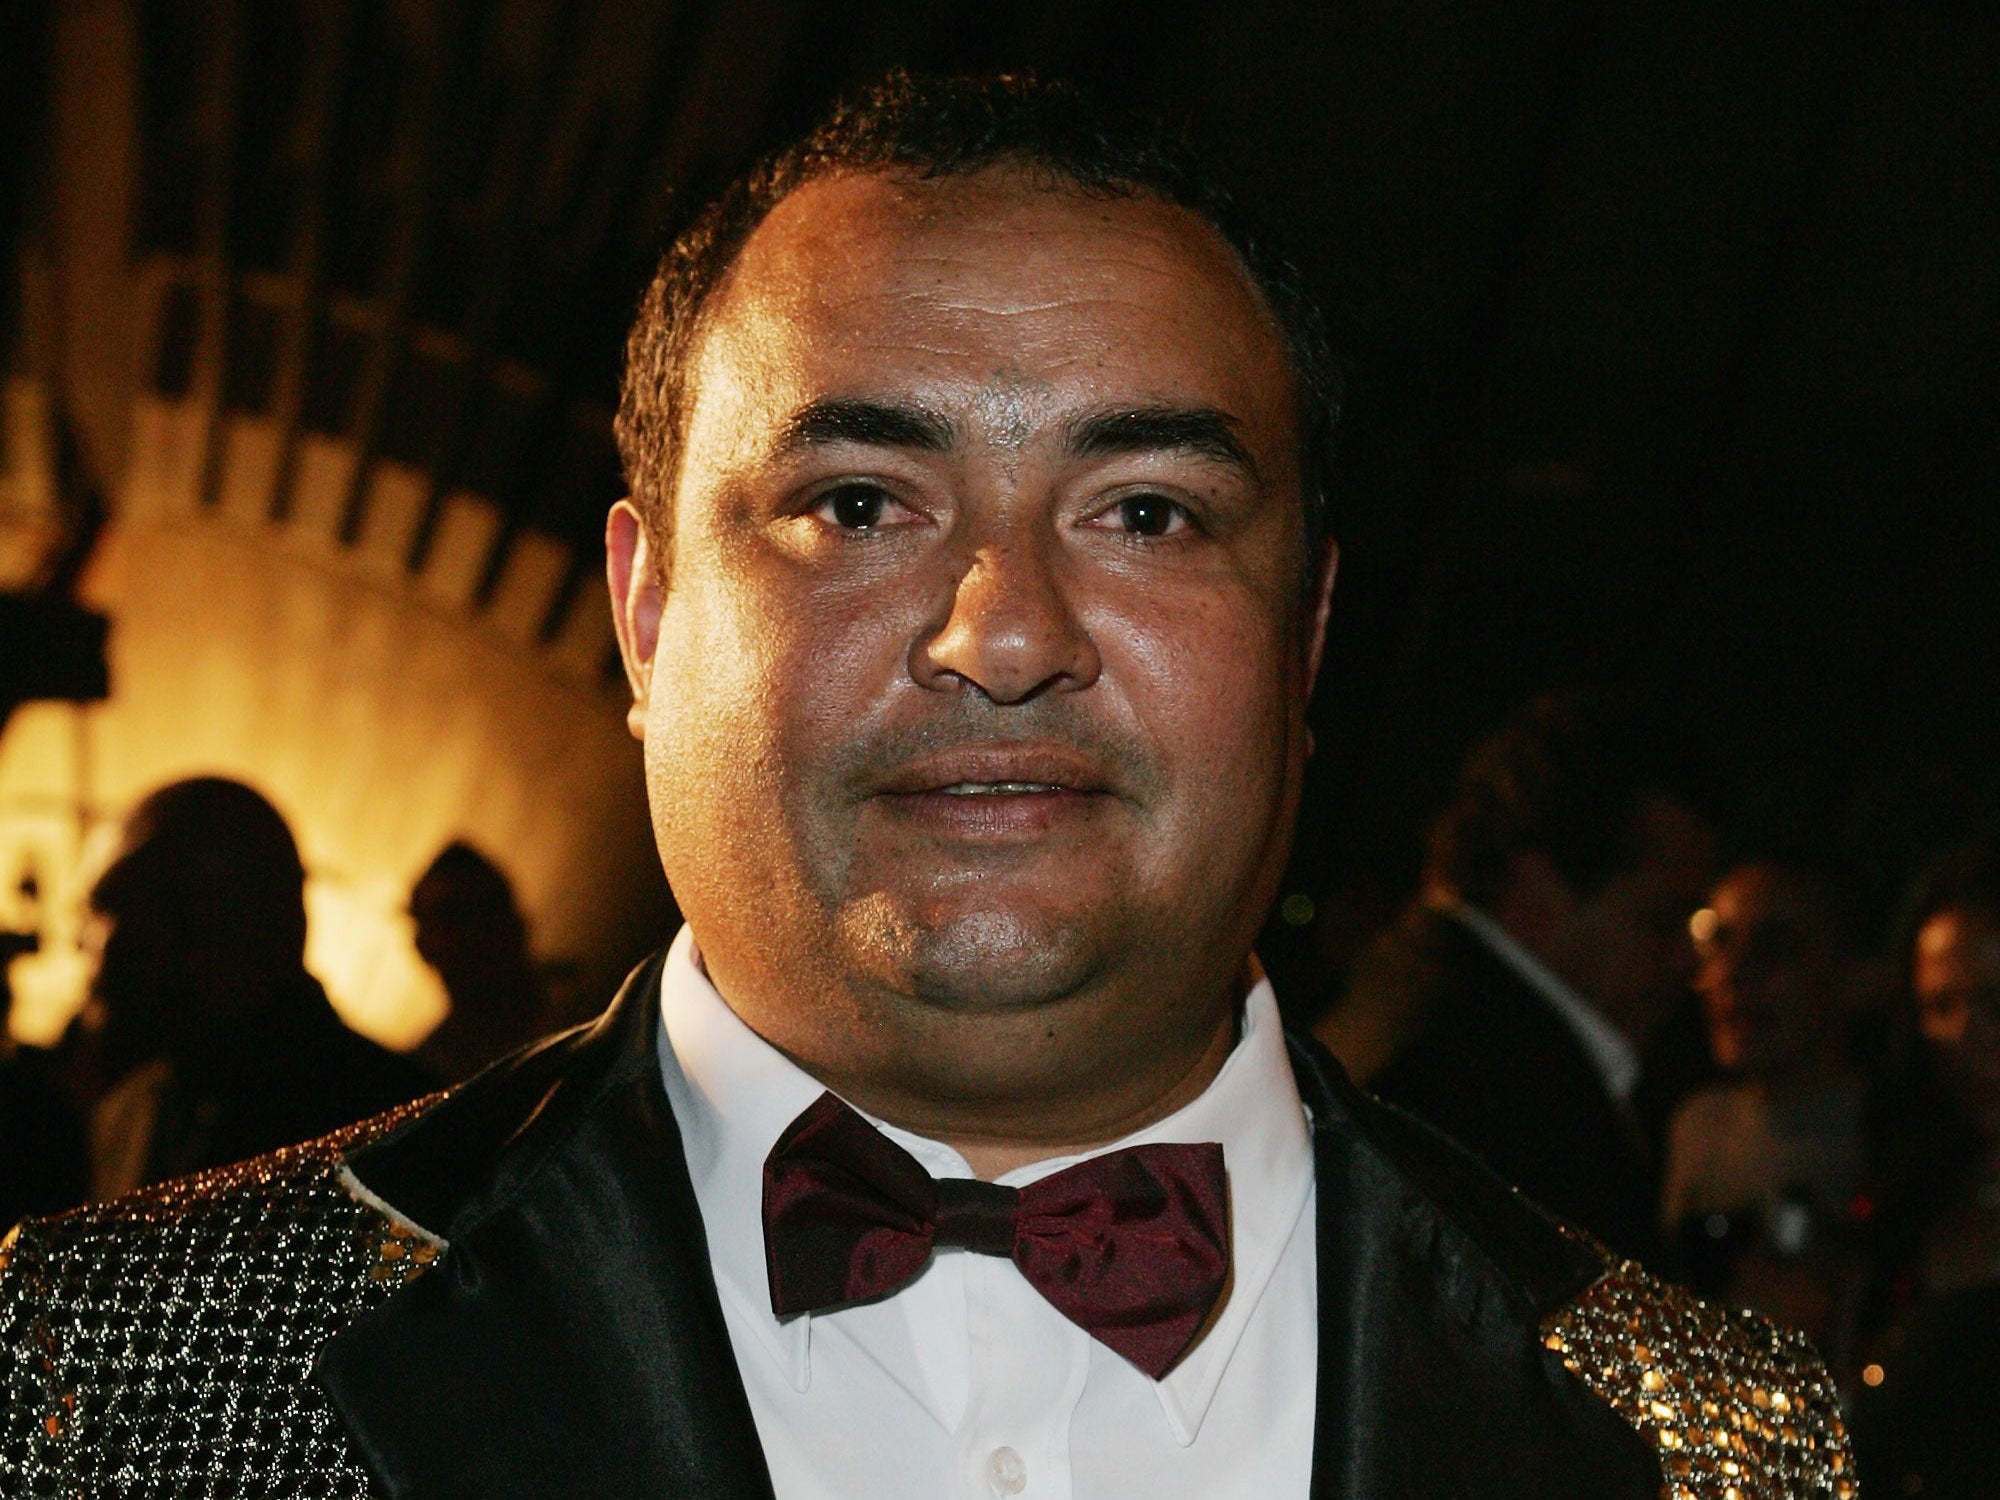 Dennis Nona photographed in 2007 at the Deadlys Awards, an annual award dedicated to the achievements of Australia's indigenous people in music, sport, entertainment and communities.